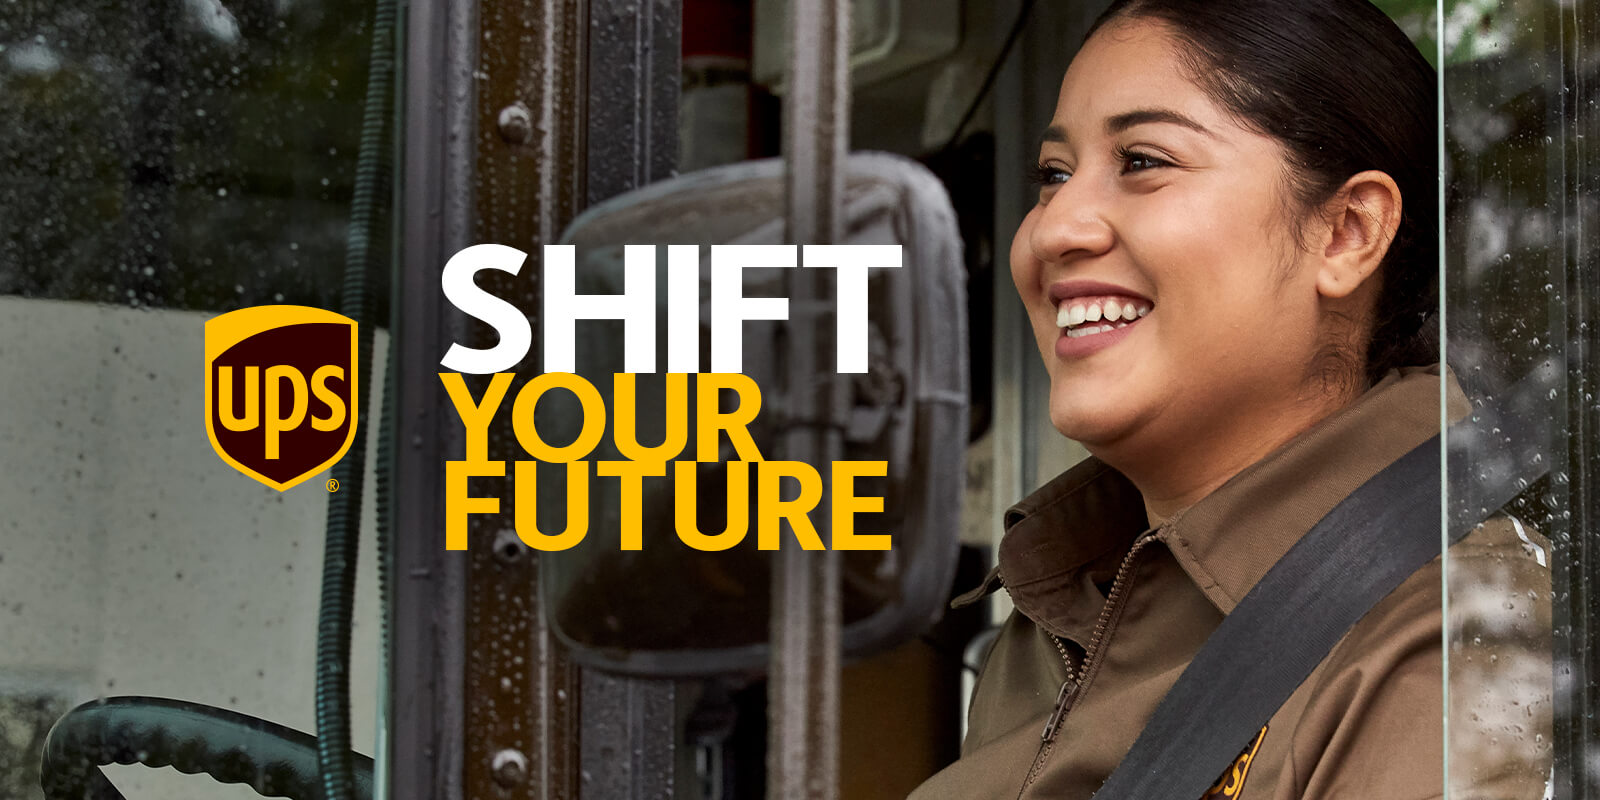 Driver Jobs in Bakersfield at United Parcel Service (UPS)